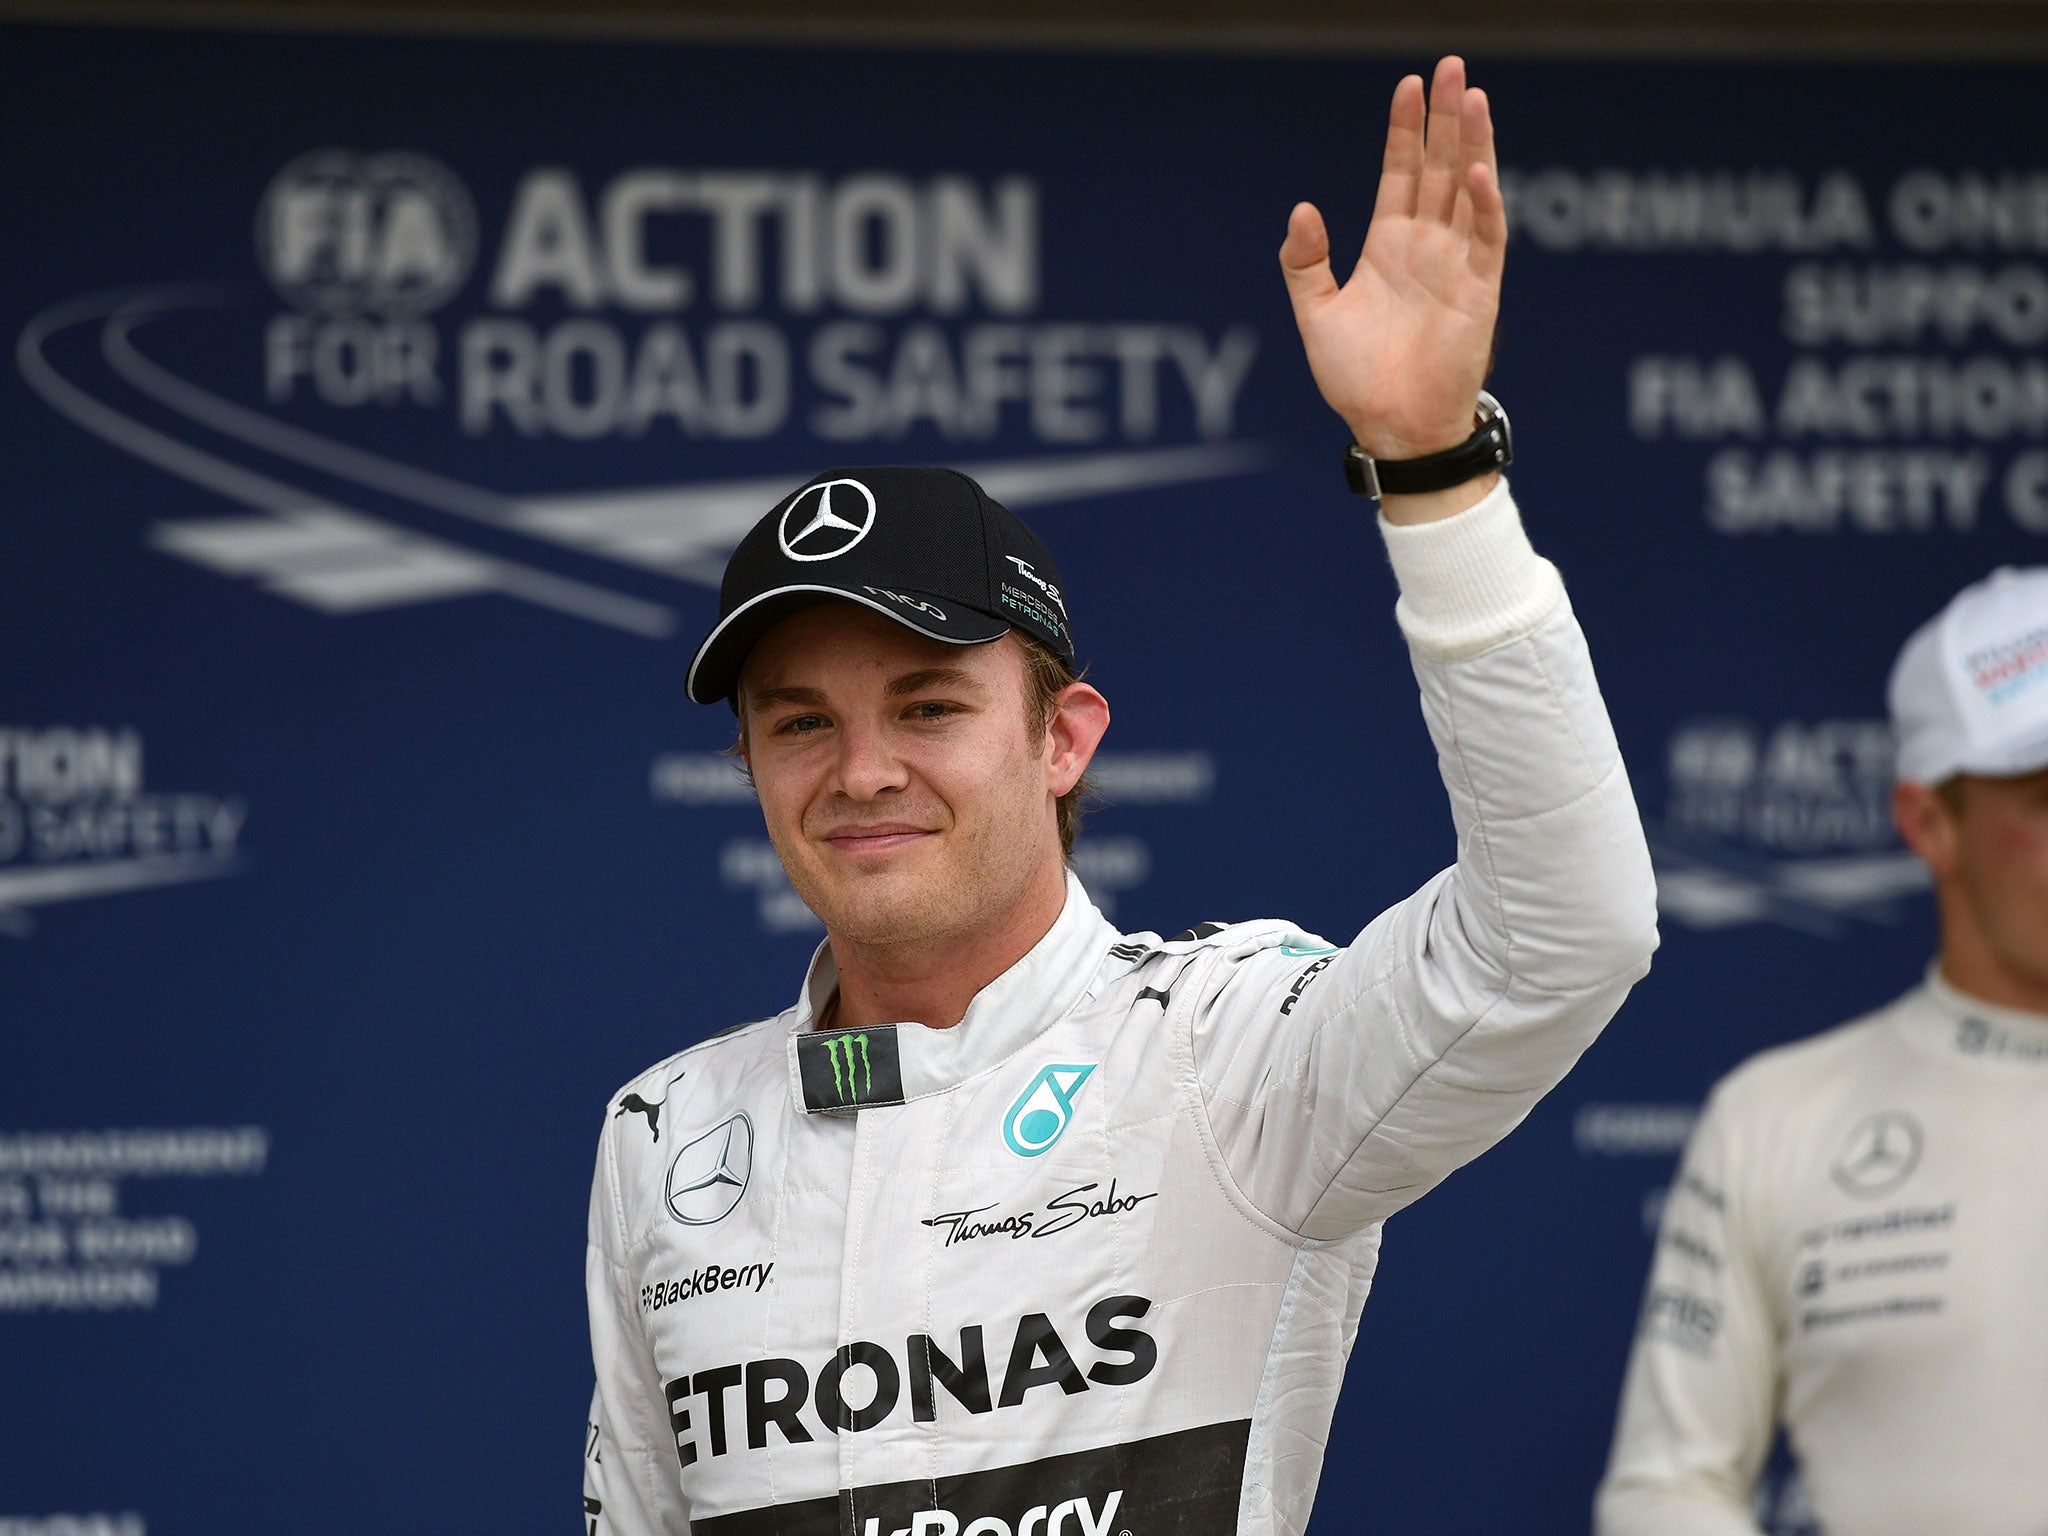 Nico Rosberg celebrates putting his Mercedes on pole after a dramatic qualifying session